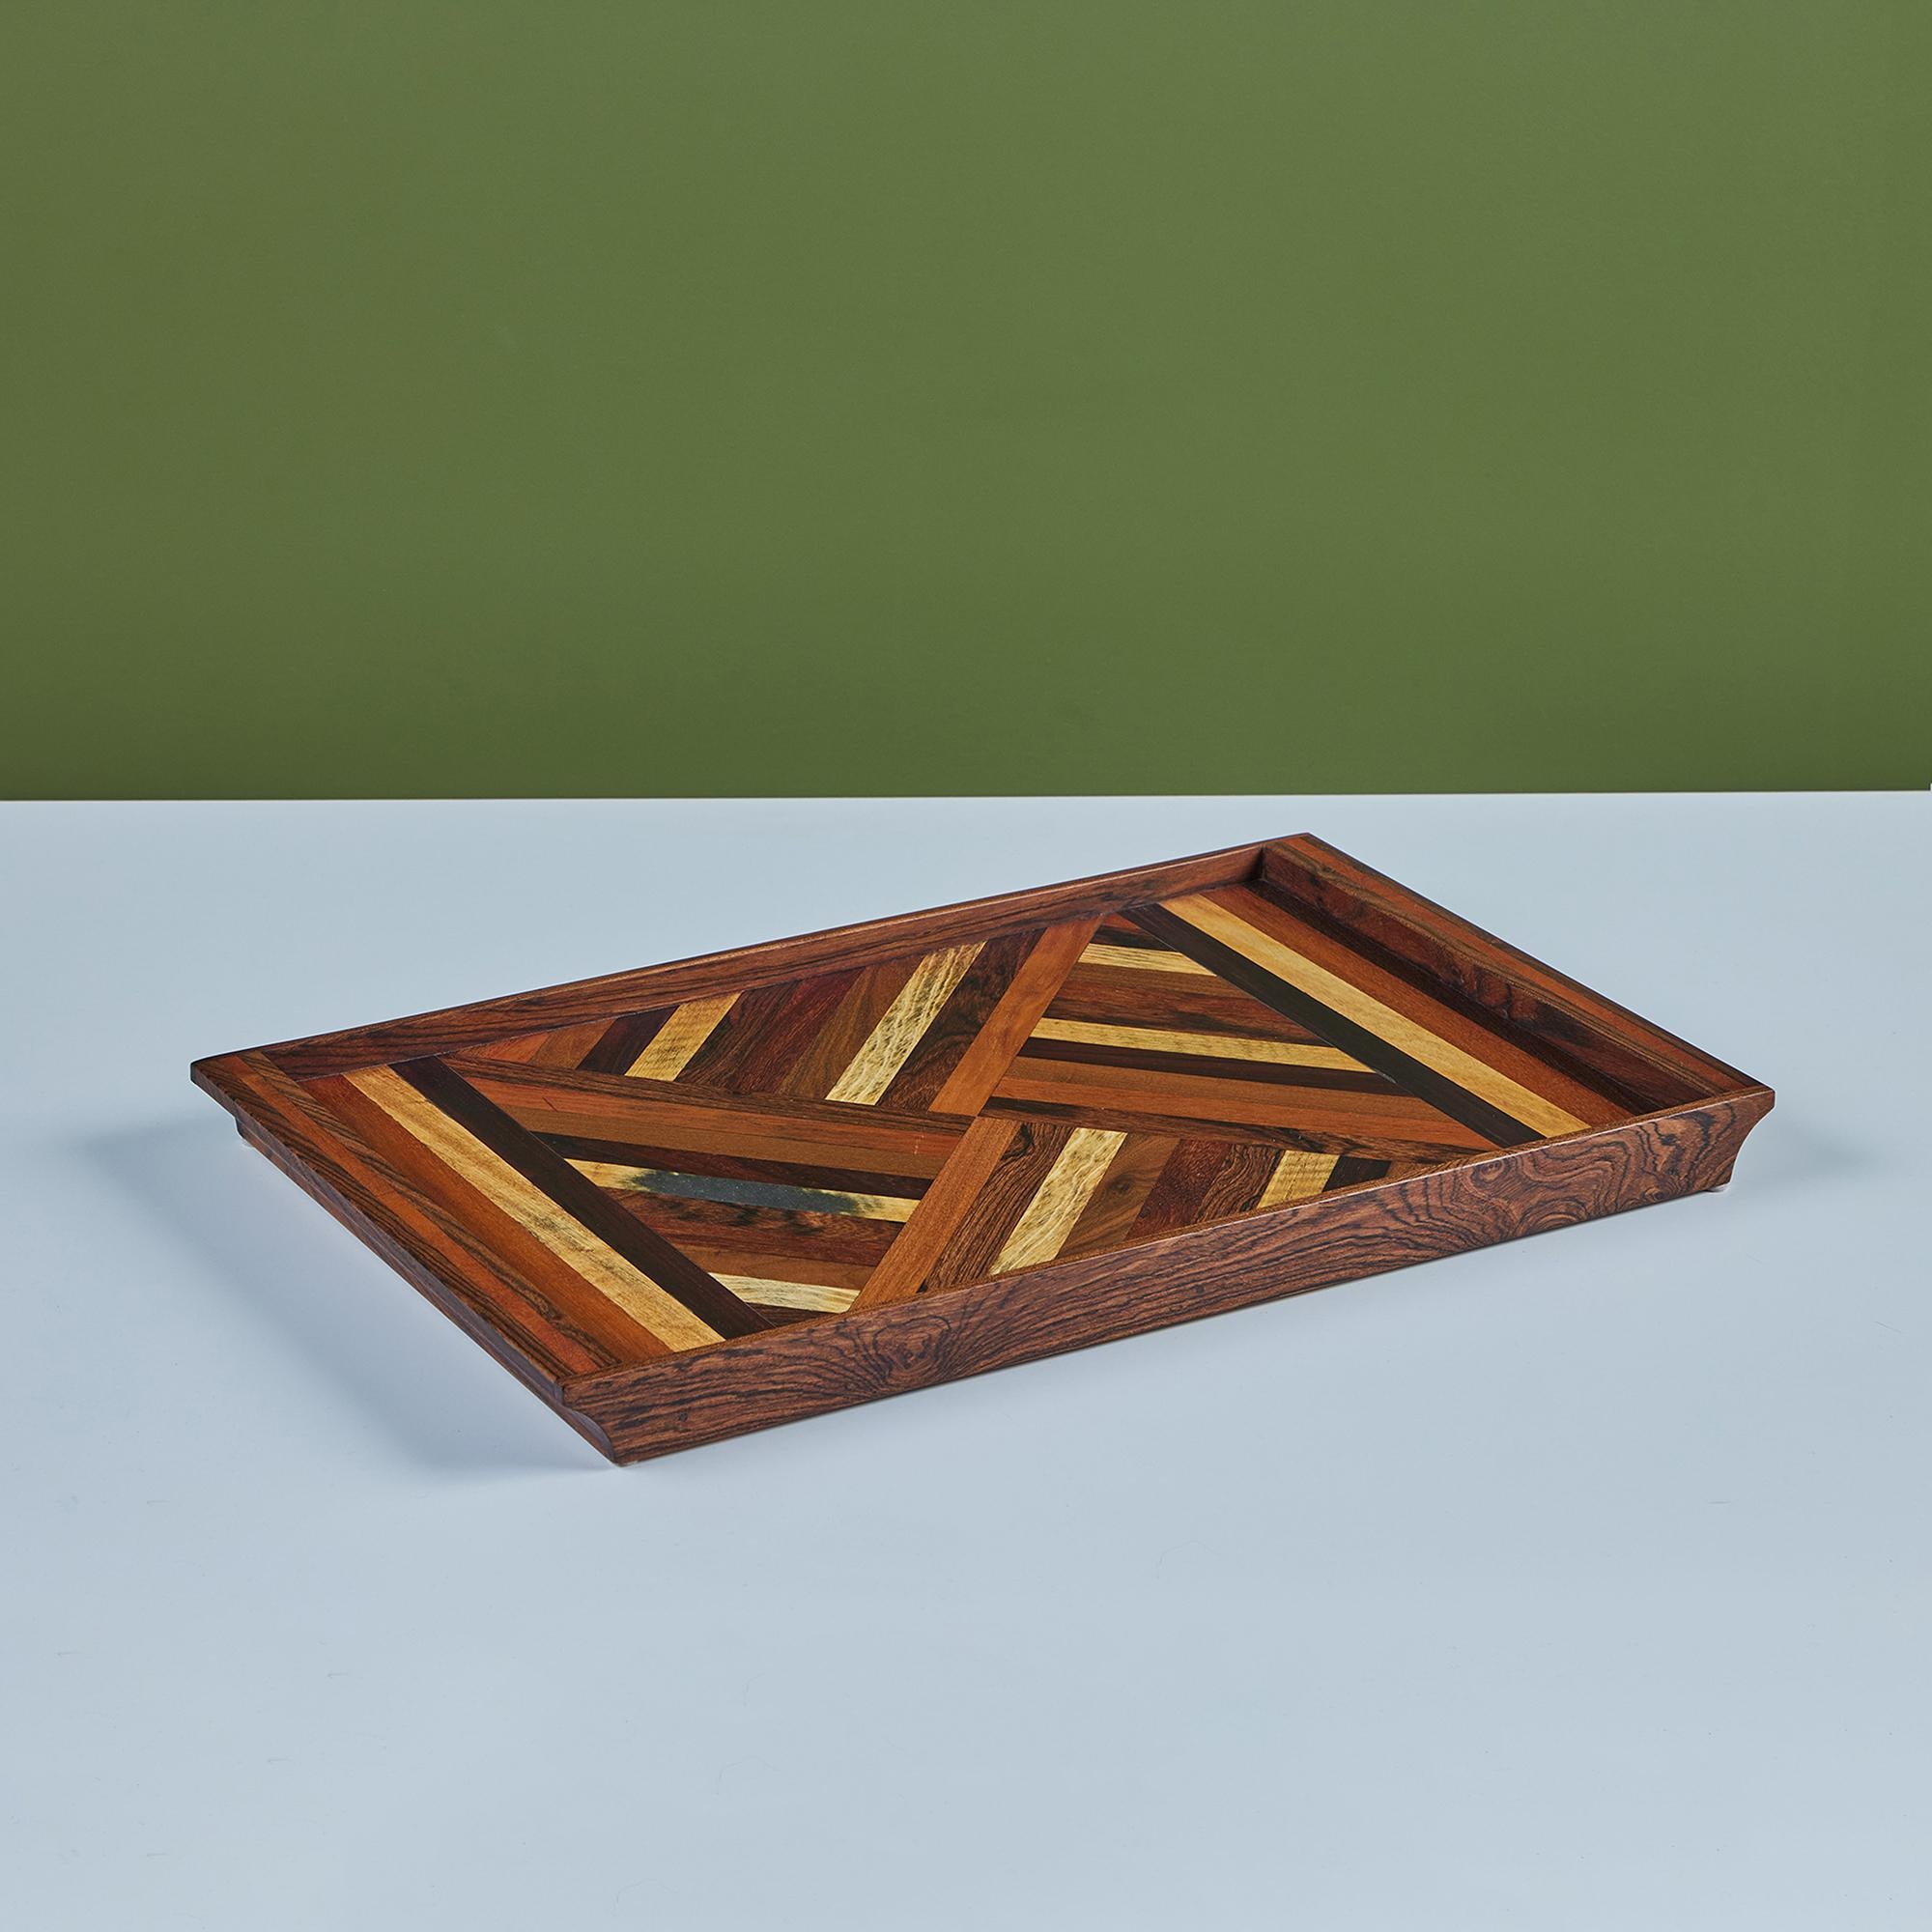 A rosewood serving tray by Don Shoemaker for his company Señal in the 1960s. The surface of the tray has a repeating geometric marquetry pattern in a gradient of local Mexican hardwoods. The rectangular tray has four sides and two handles.

CITES